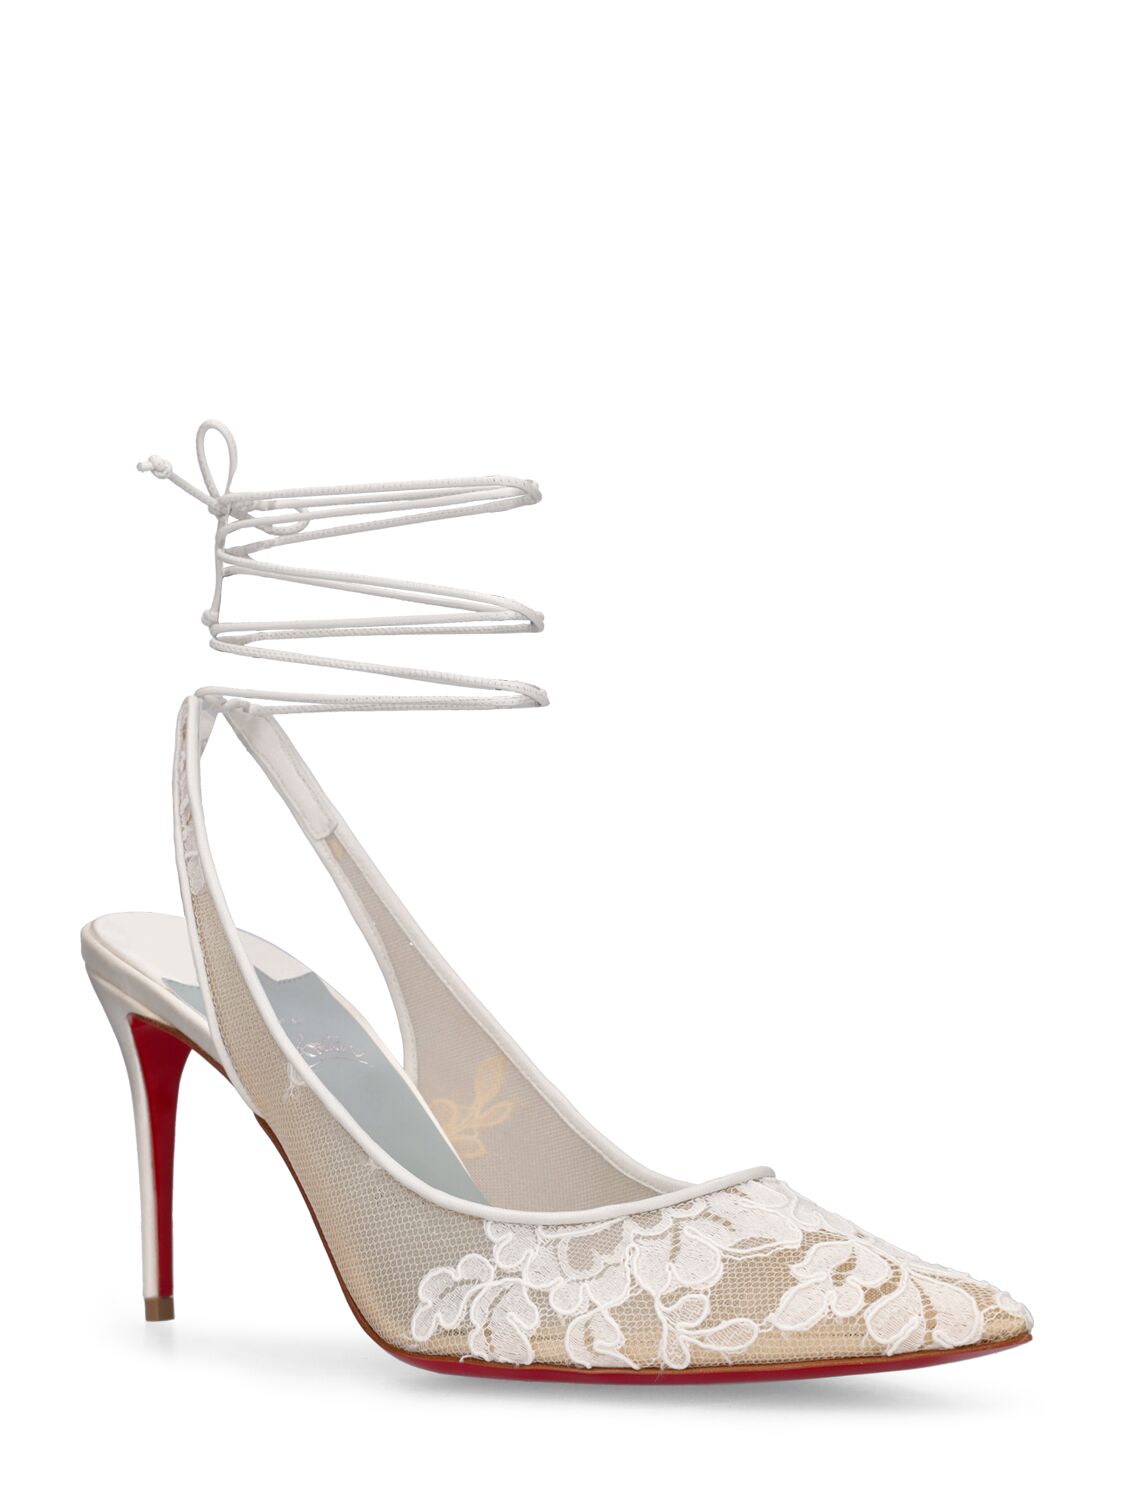 Shop Christian Louboutin 85mm Kate Lace Pumps In White